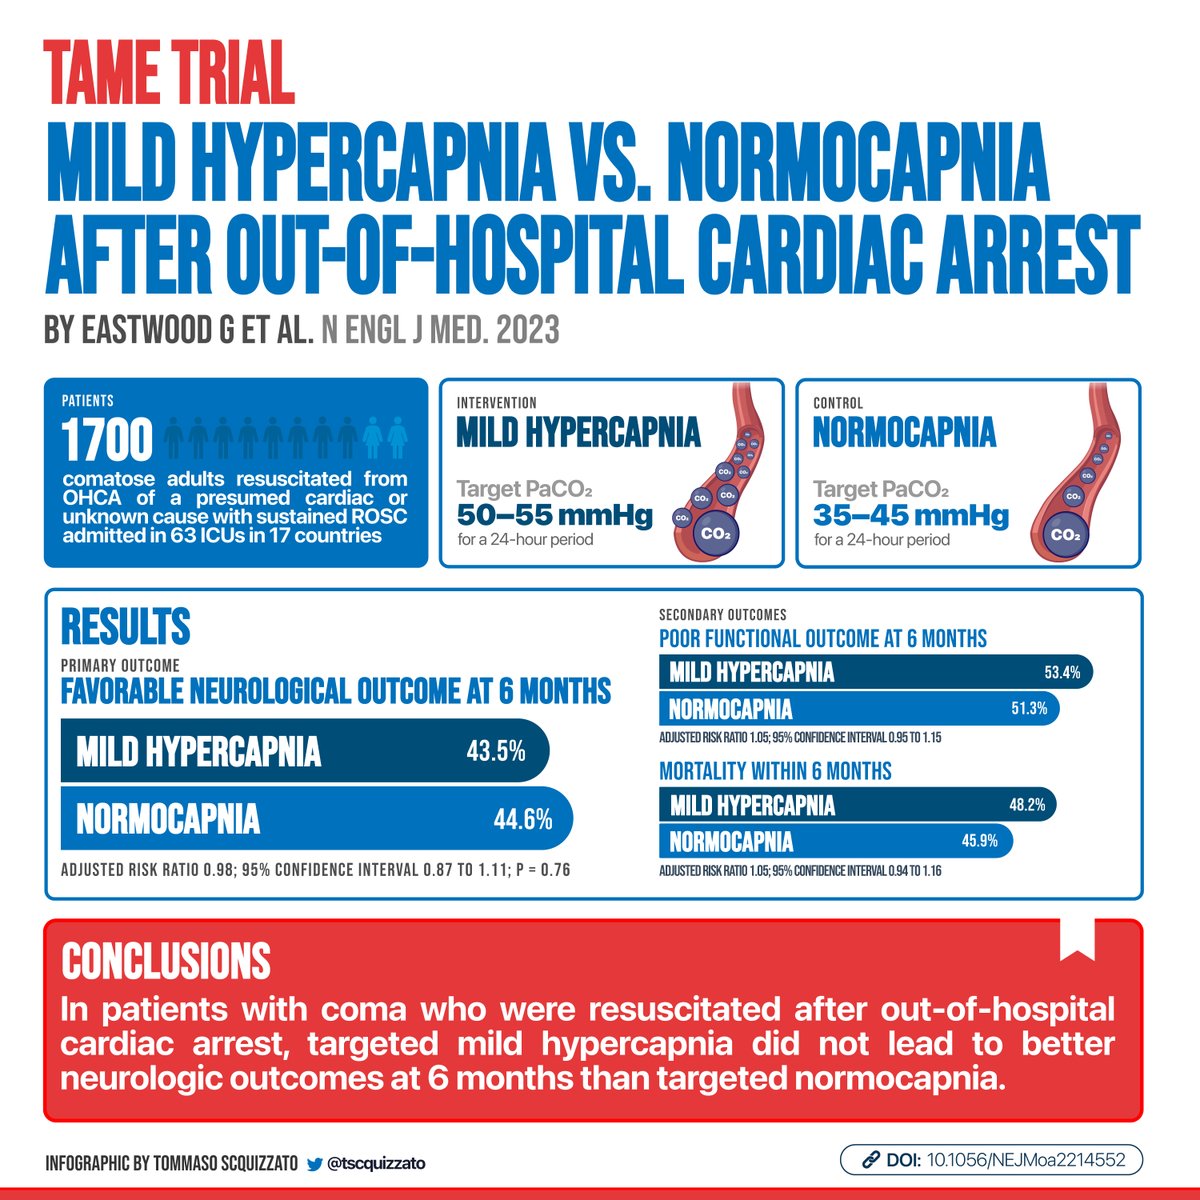 #TAMEtrial just published!

🩸 Does mild hypercapnia (50-55 mmHg) vs normocapnia (35-45 mmHg) improve outcomes in OHCAs admitted to the ICU?

🧠 Good neuro outcome at 6 mo:
43.5% (hypercapnia) vs 44.6% (normocapnia)

🔗 @NEJM nejm.org/doi/full/10.10…

#CCR23 #ResusTwitter #FOAMcc